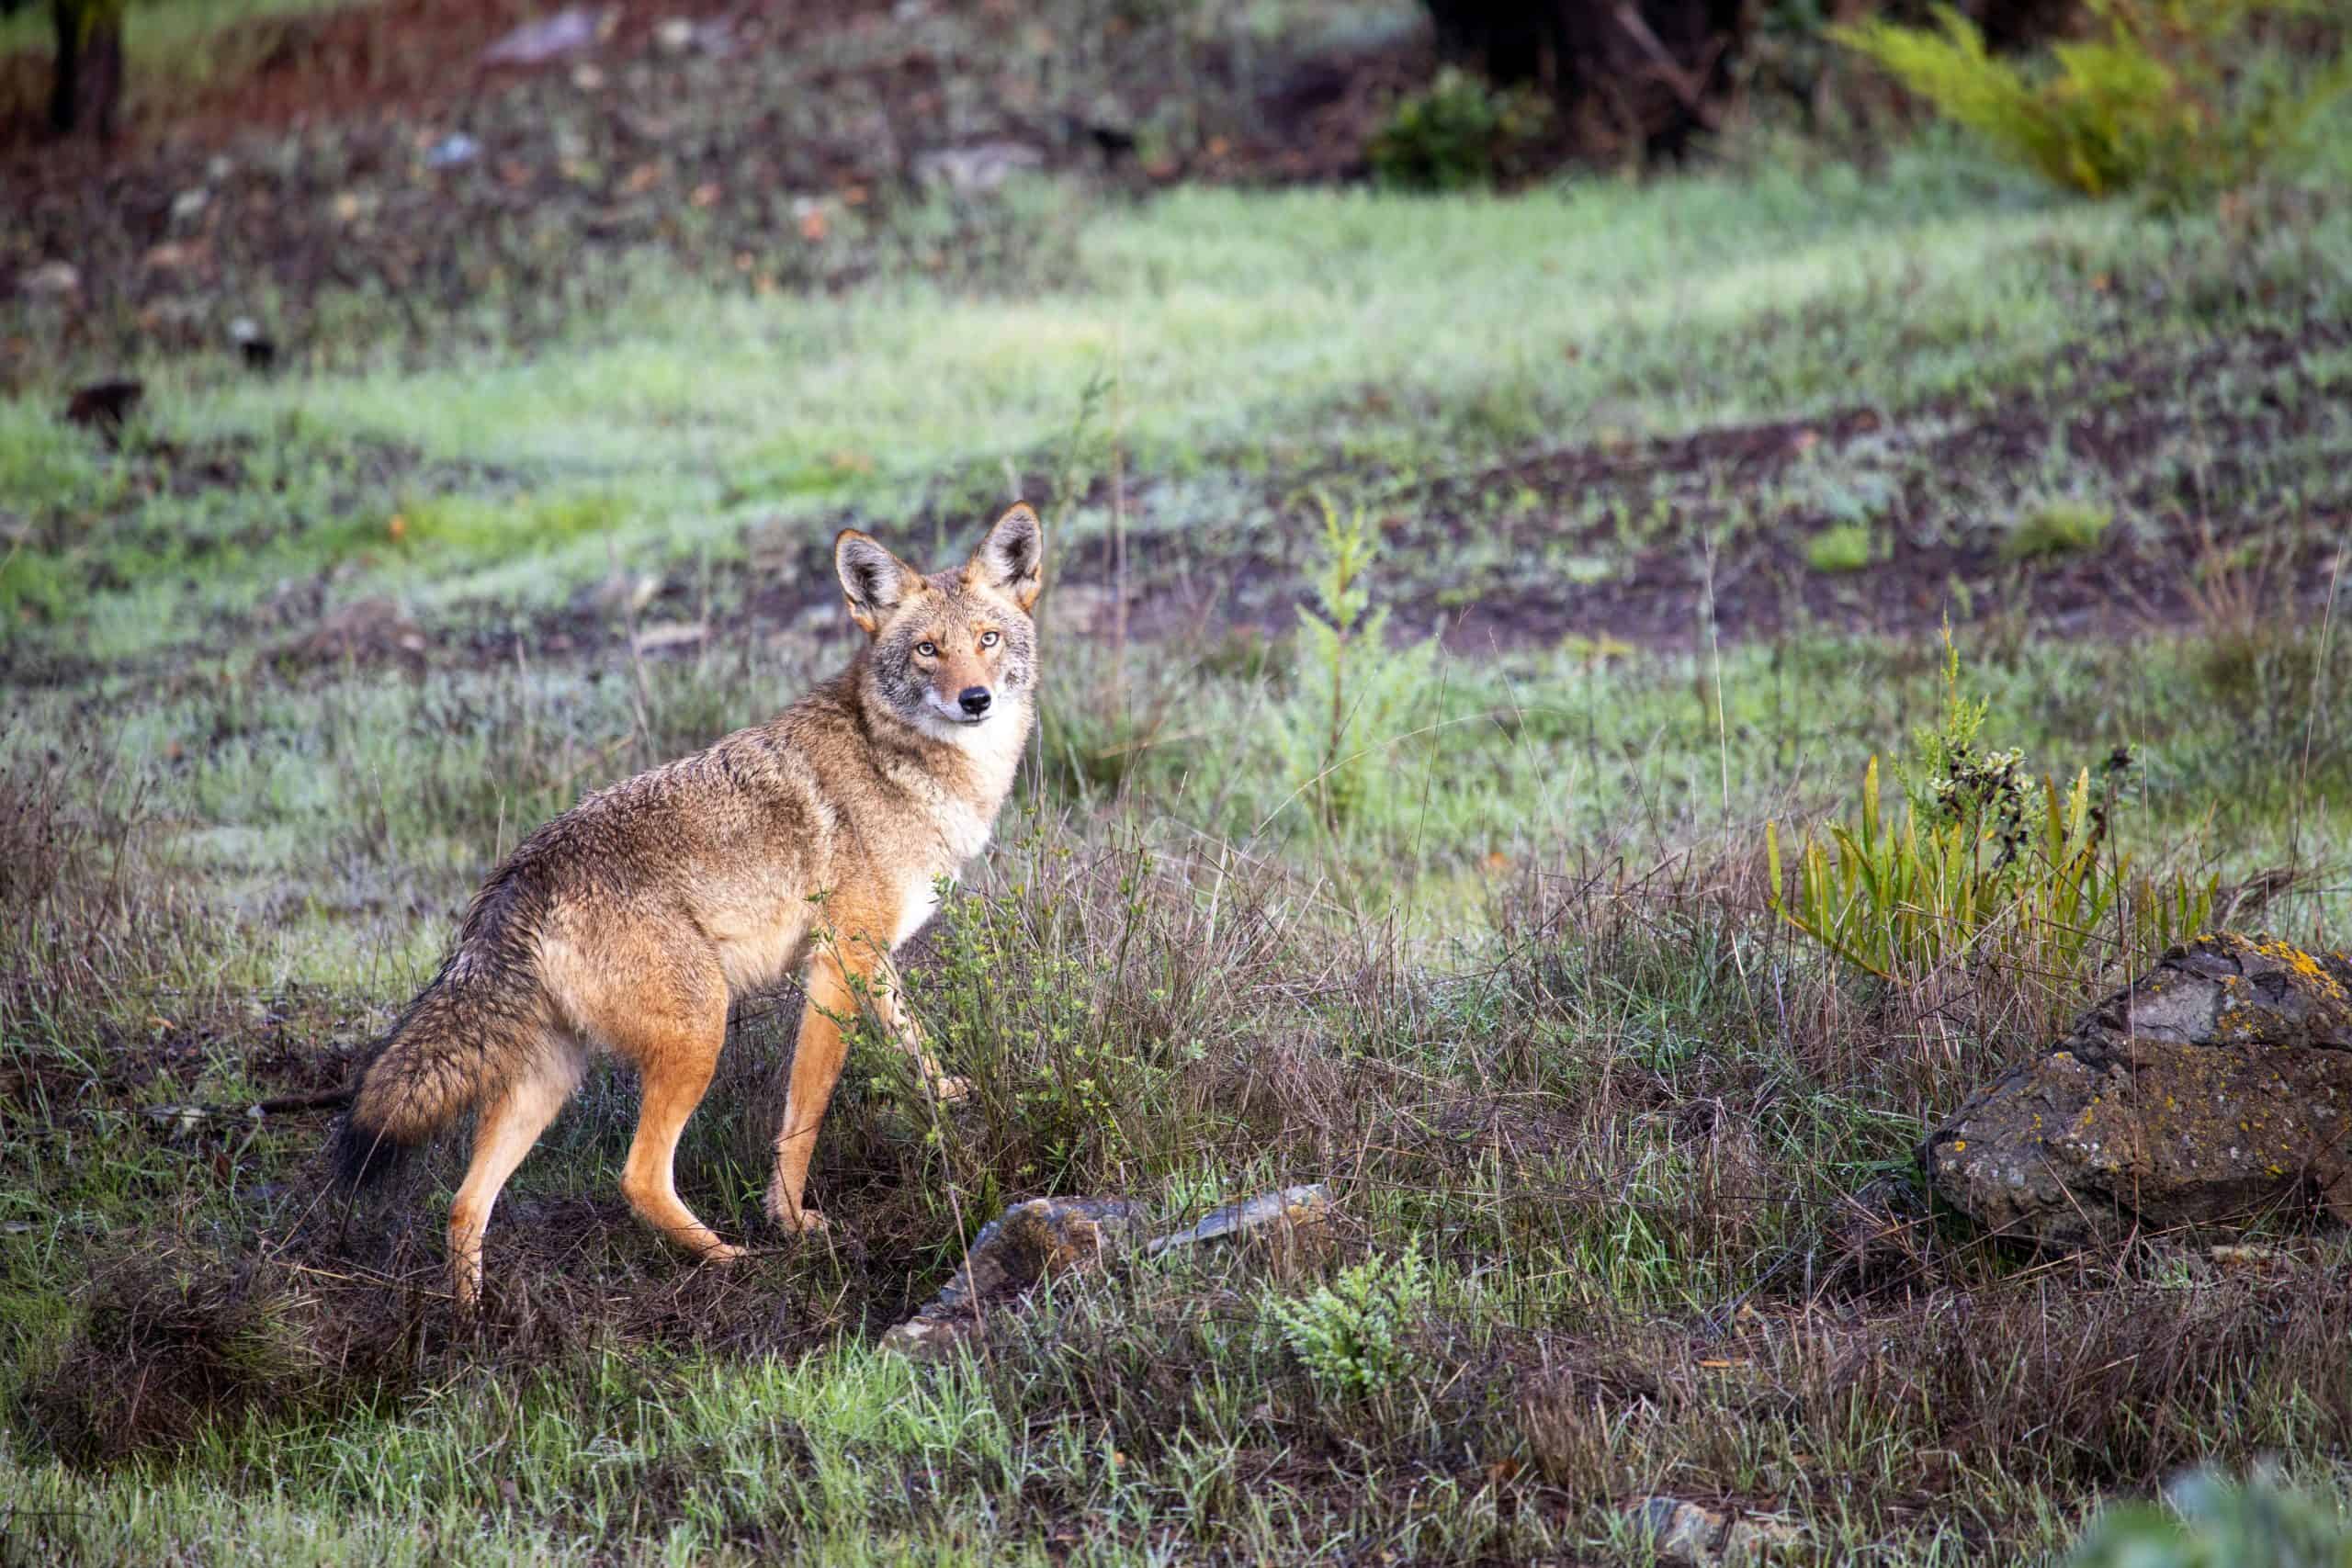 Authorities are asking residents to stop feeding coyotes in Brampton